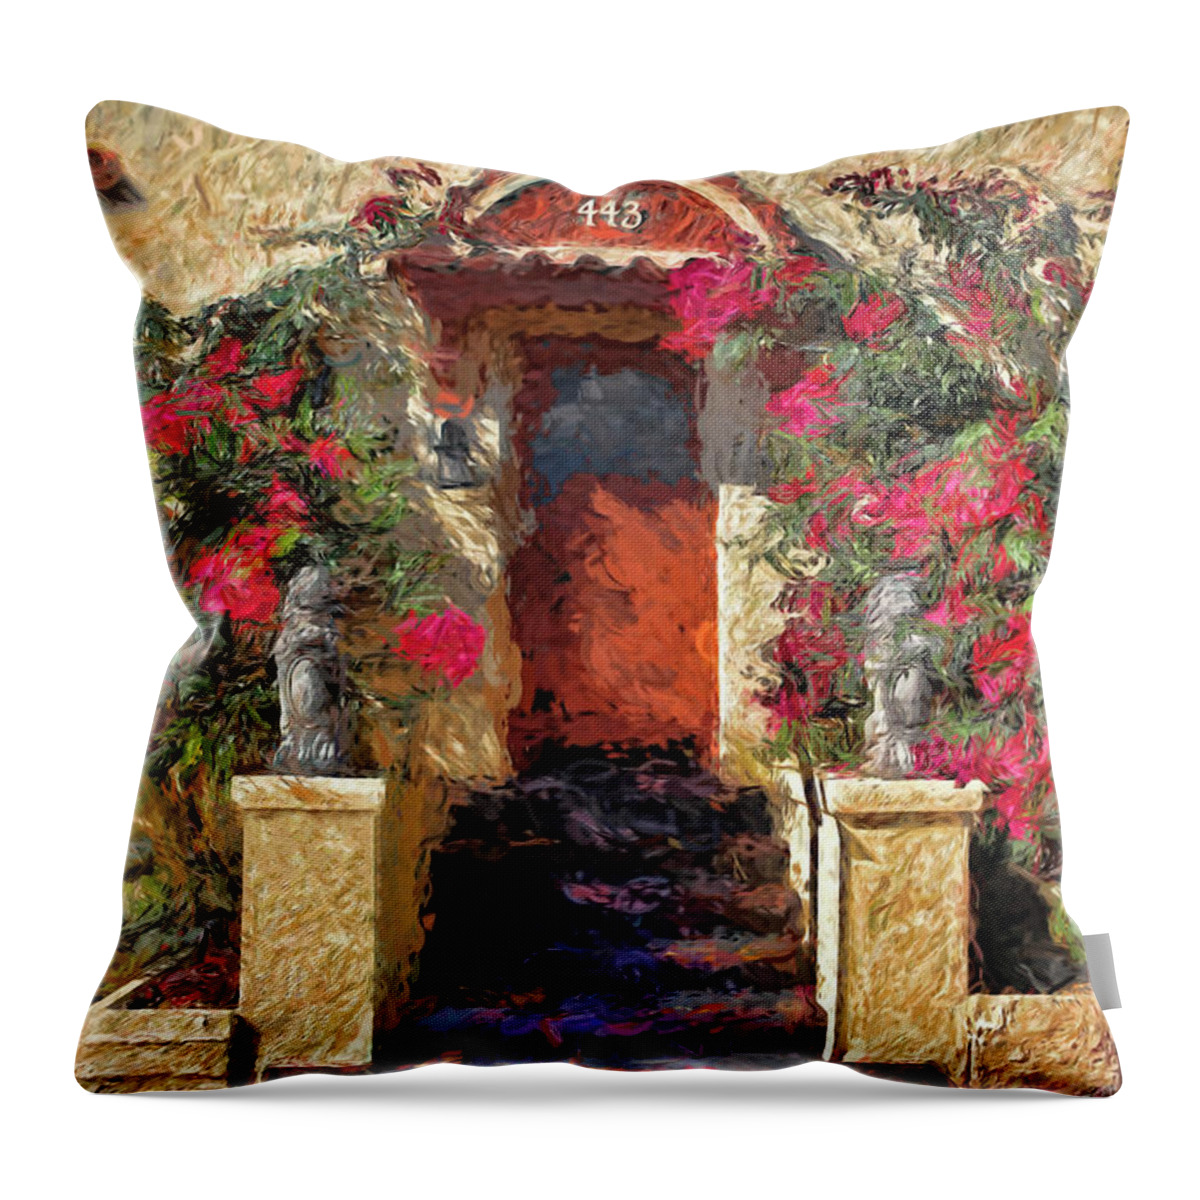 Burns Court Throw Pillow featuring the photograph The Orange Door by HH Photography of Florida